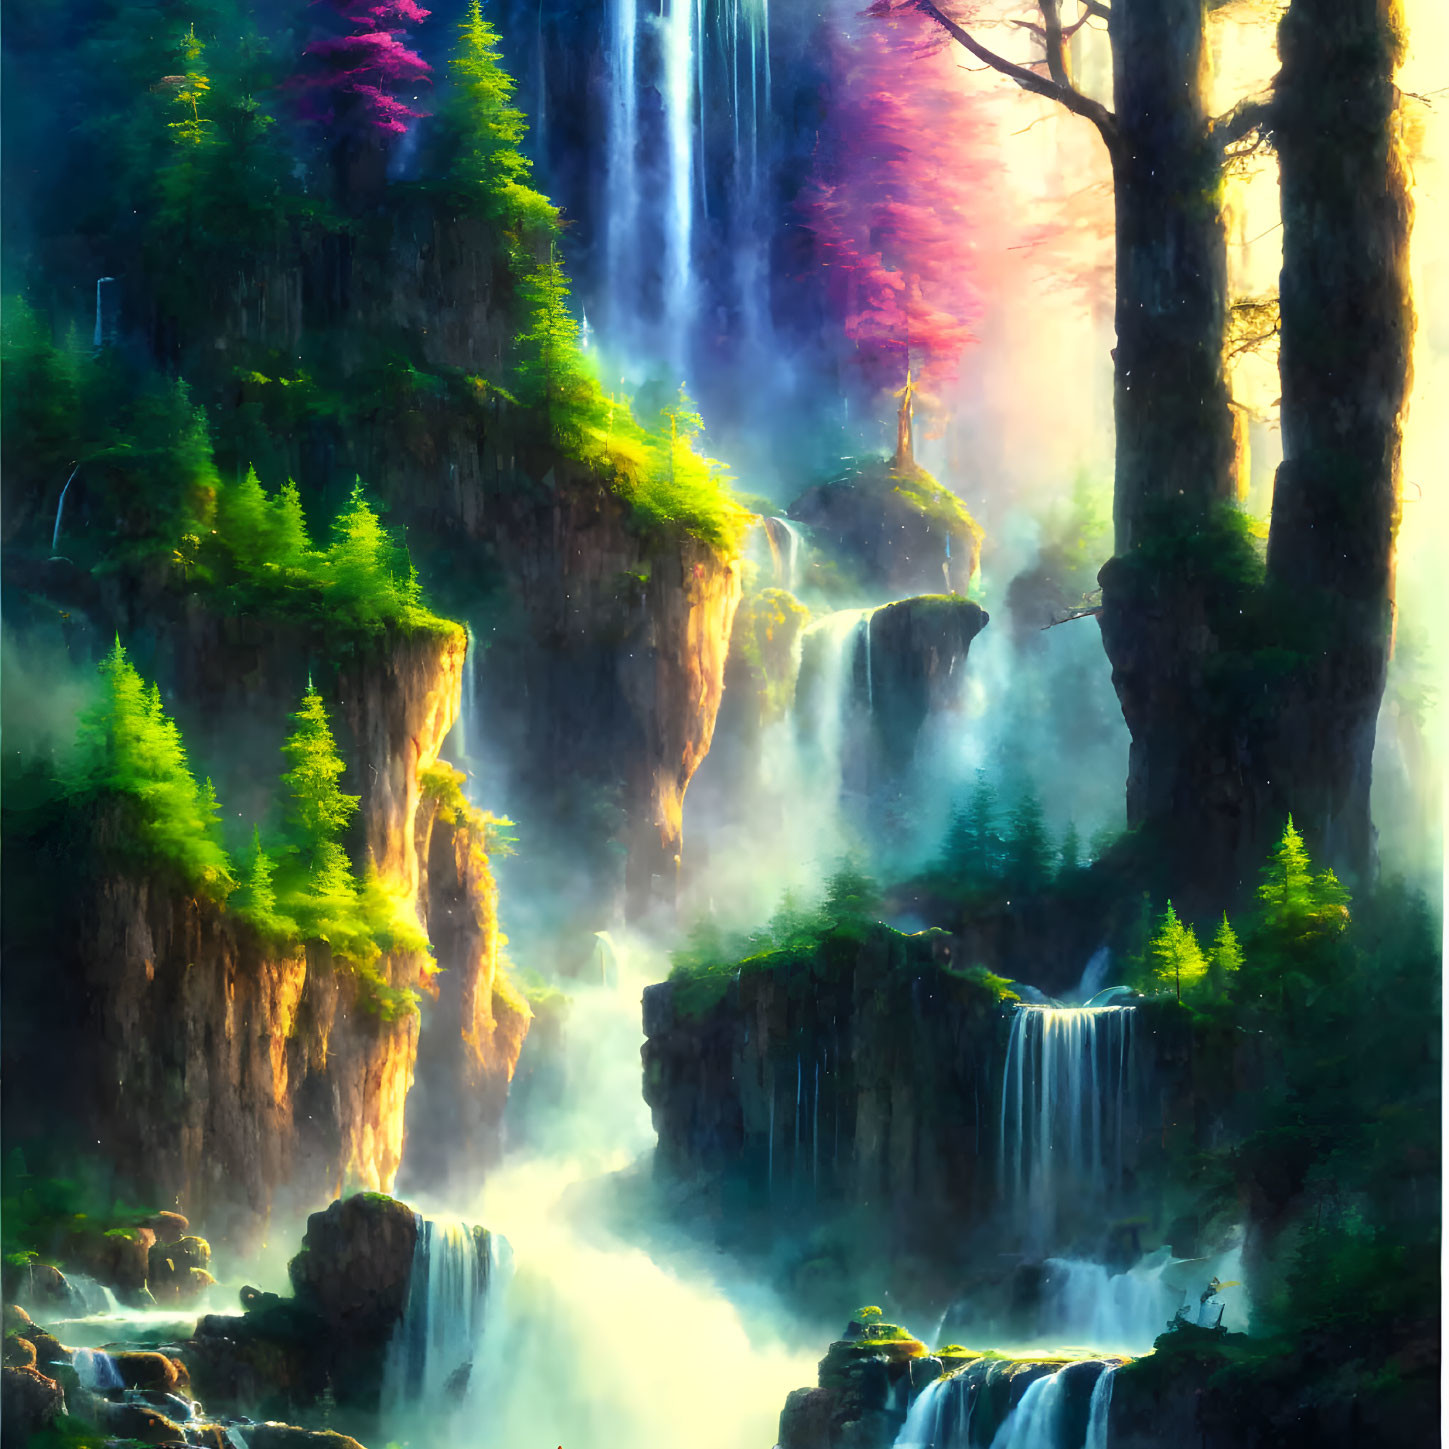 Enchanting forest waterfall with sunlight and mist cascades